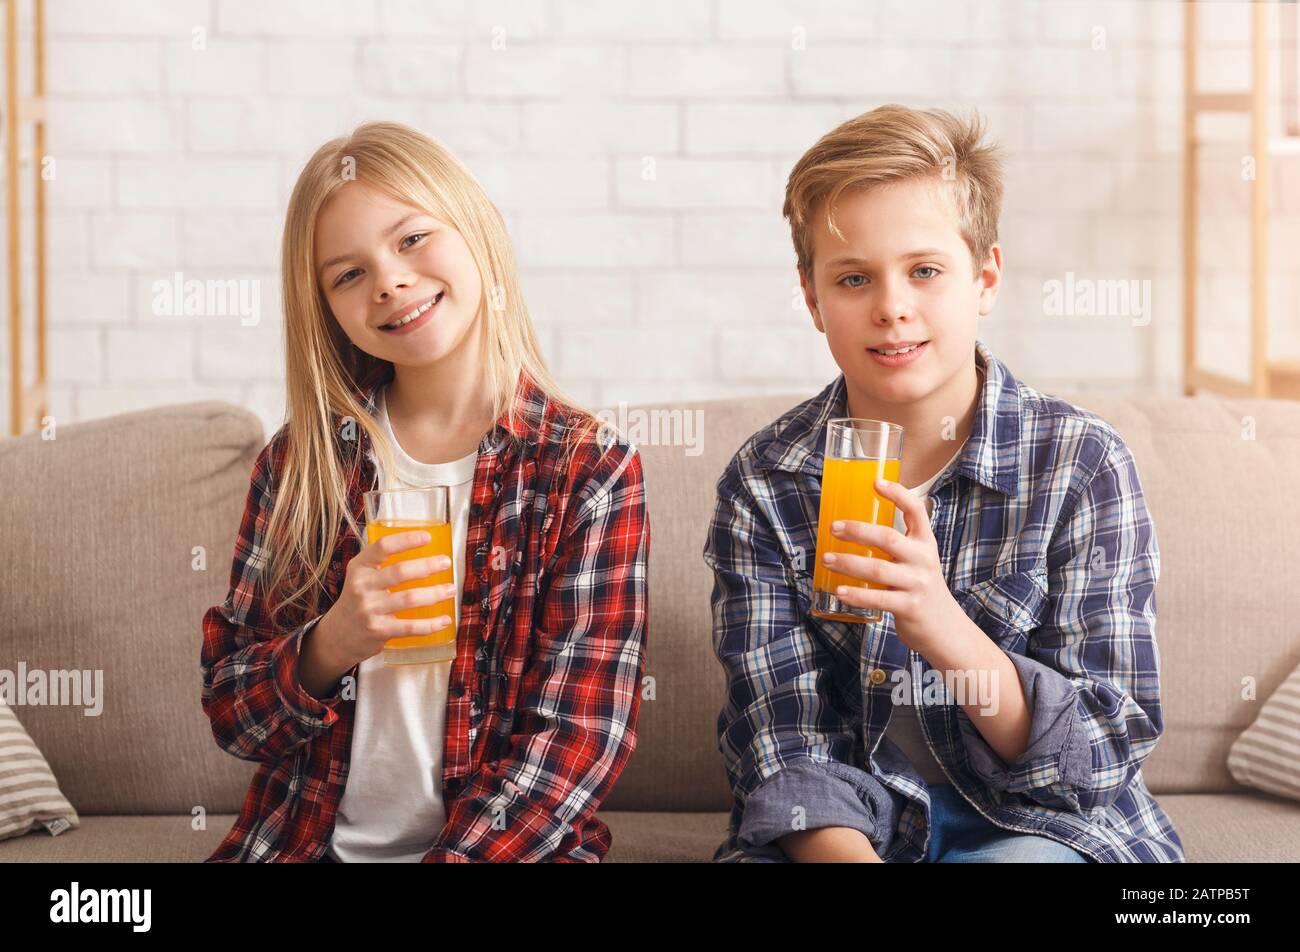 Brother And Sister Drinking Orange Juice Sitting On Sofa Indoor Stock Photo